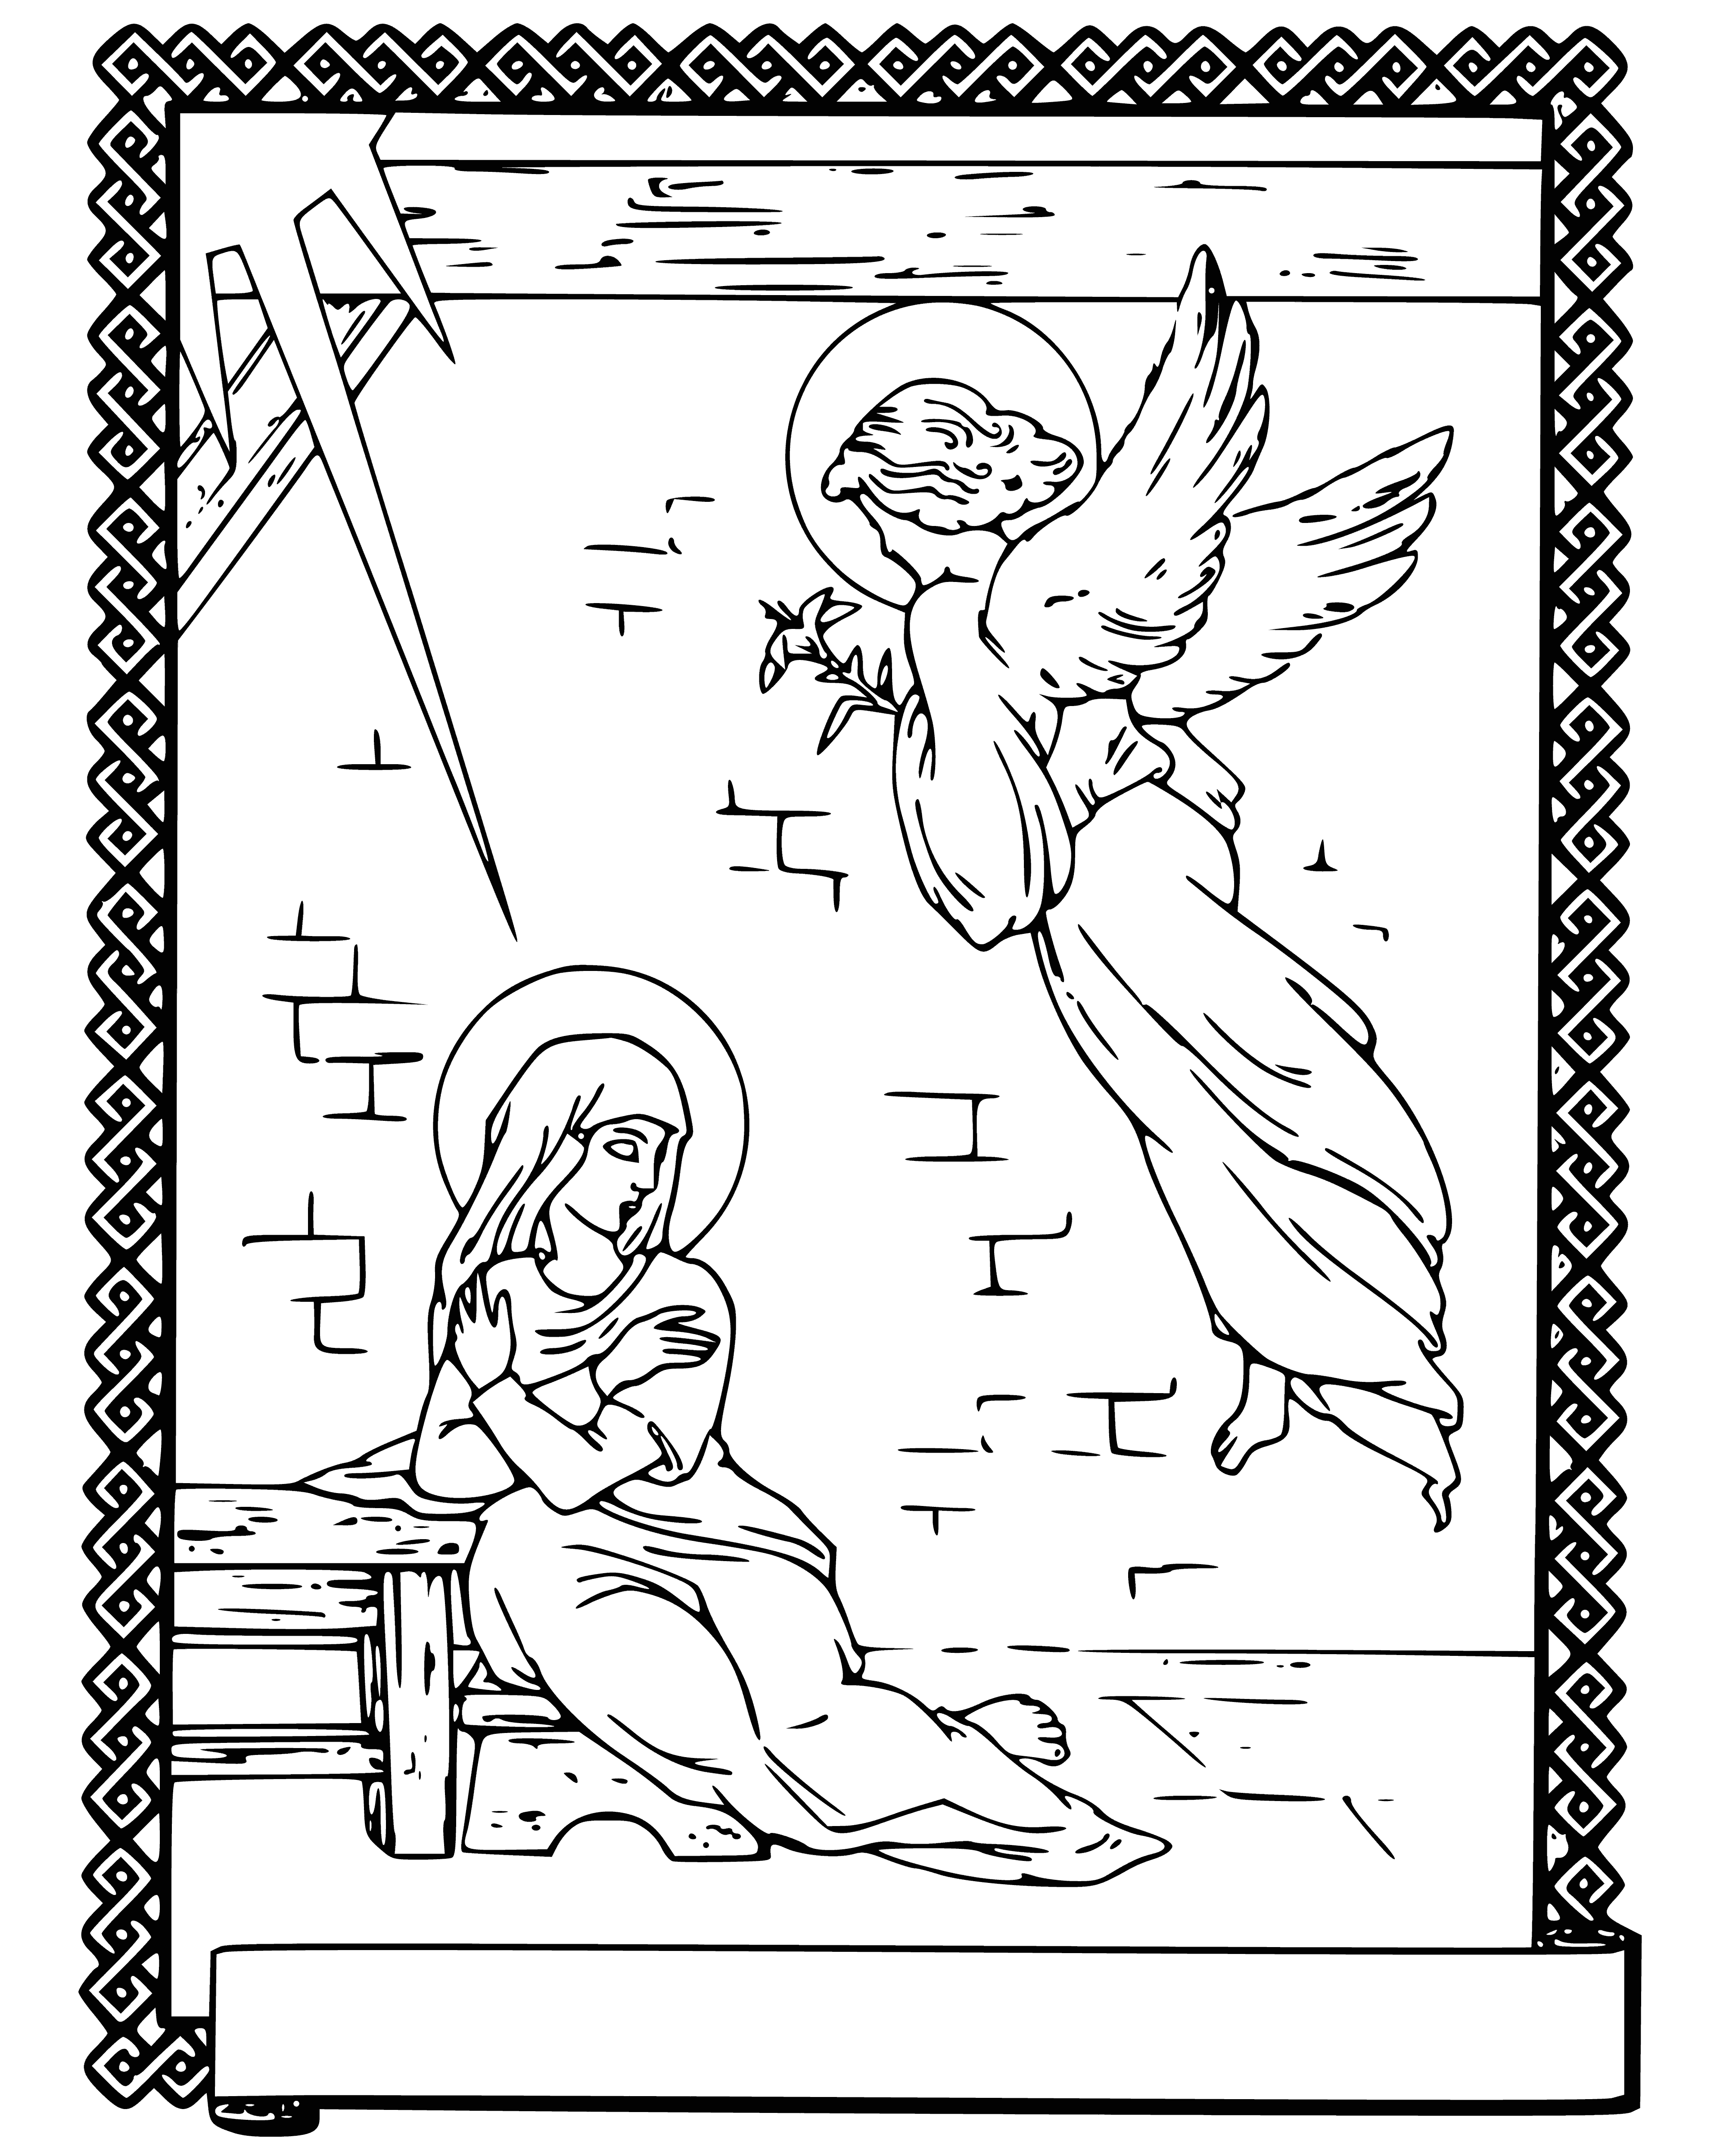 coloring page: The Annunciation celebrates Archangel Gabriel's appearance to the Virgin Mary, announcing the birth of Jesus on March 25 - Feast of the Incarnation.